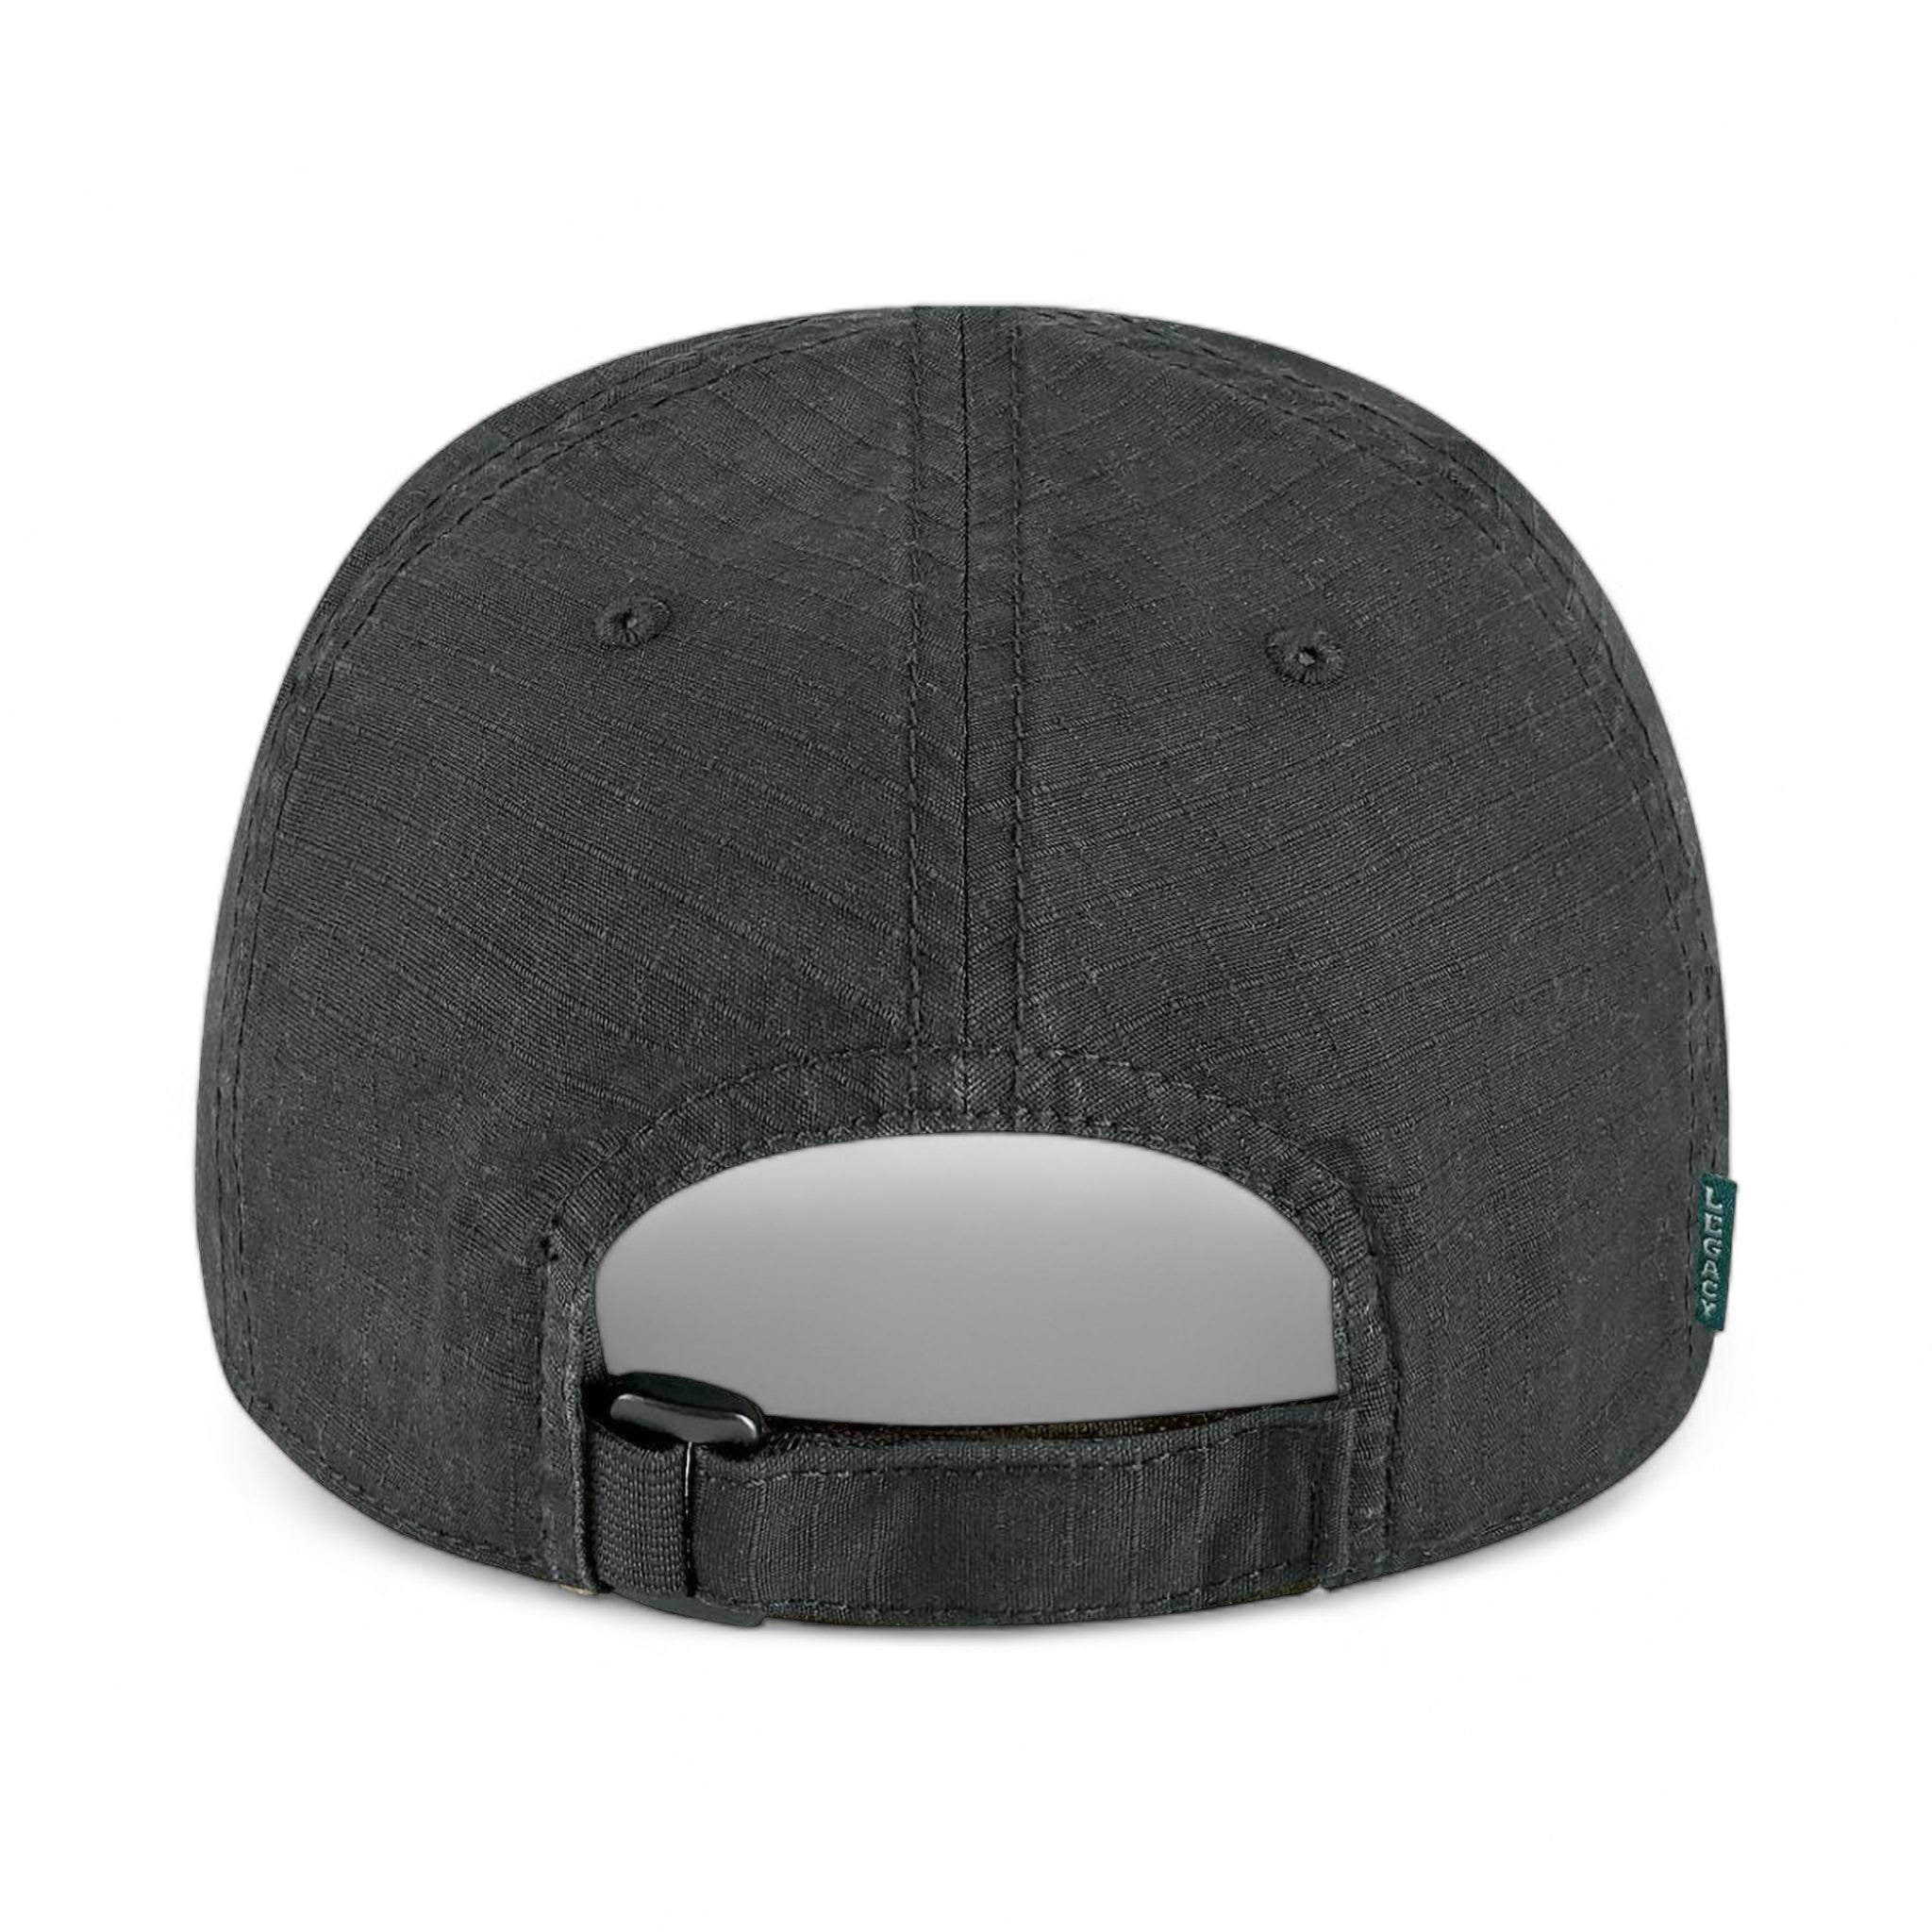 Back view of LEGACY TACT custom hat in black